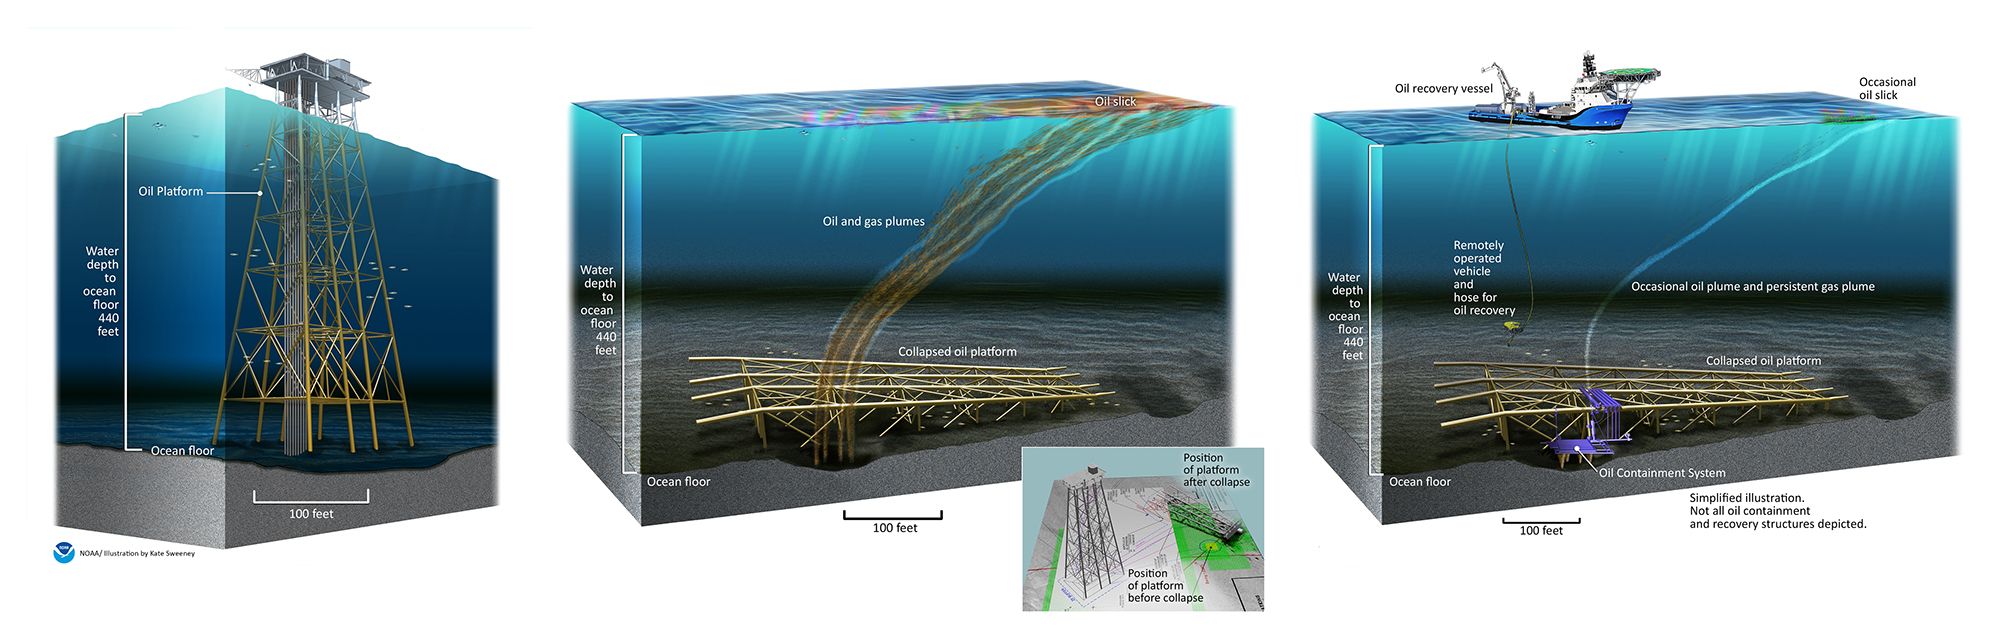 Illustrations of oil platform, collapsed platform and oil plum, and oil recovery